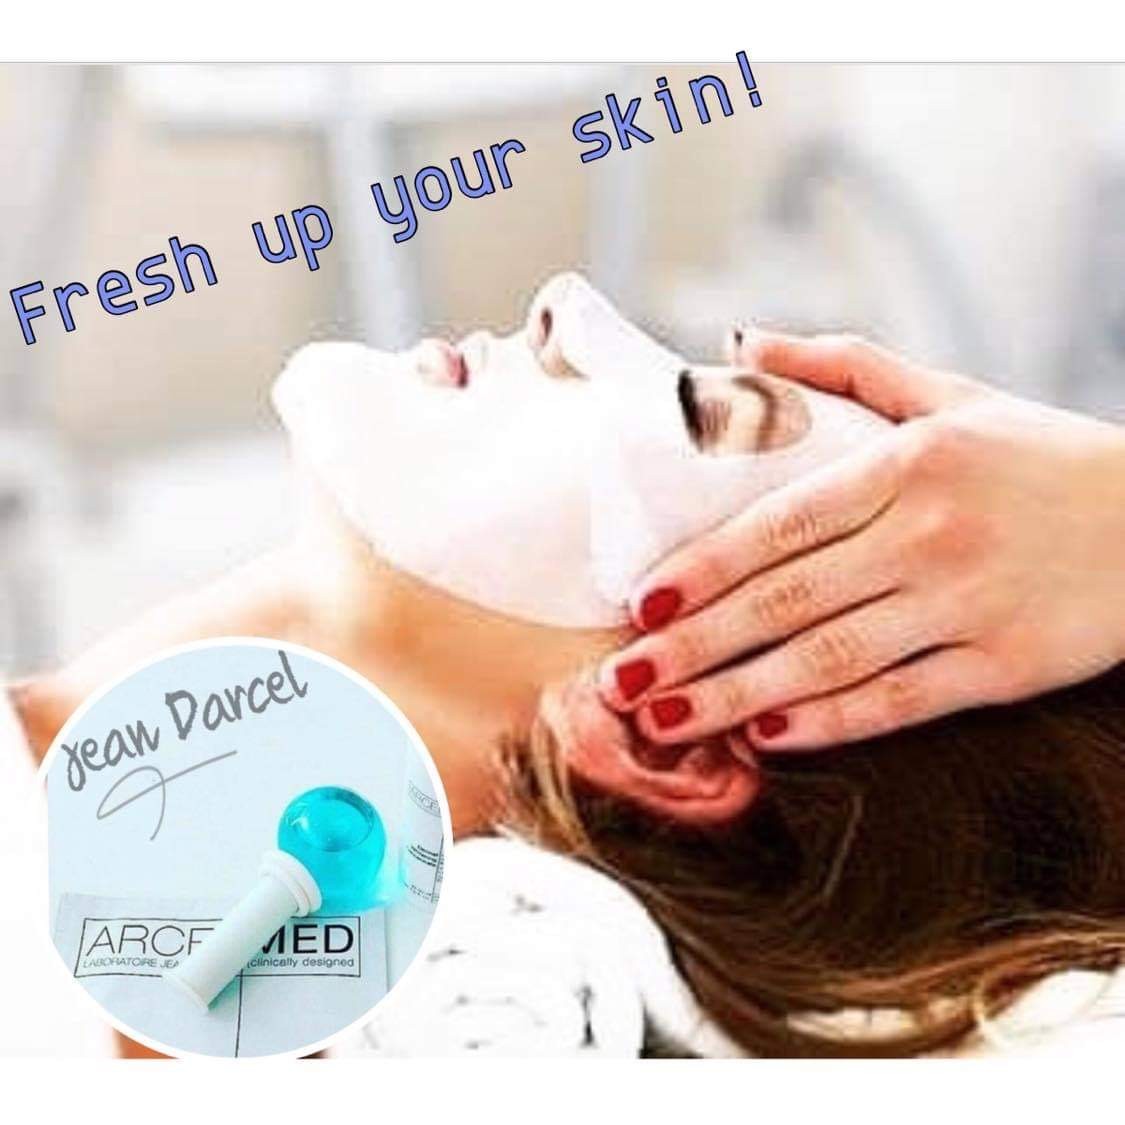 Fresh up your skin!